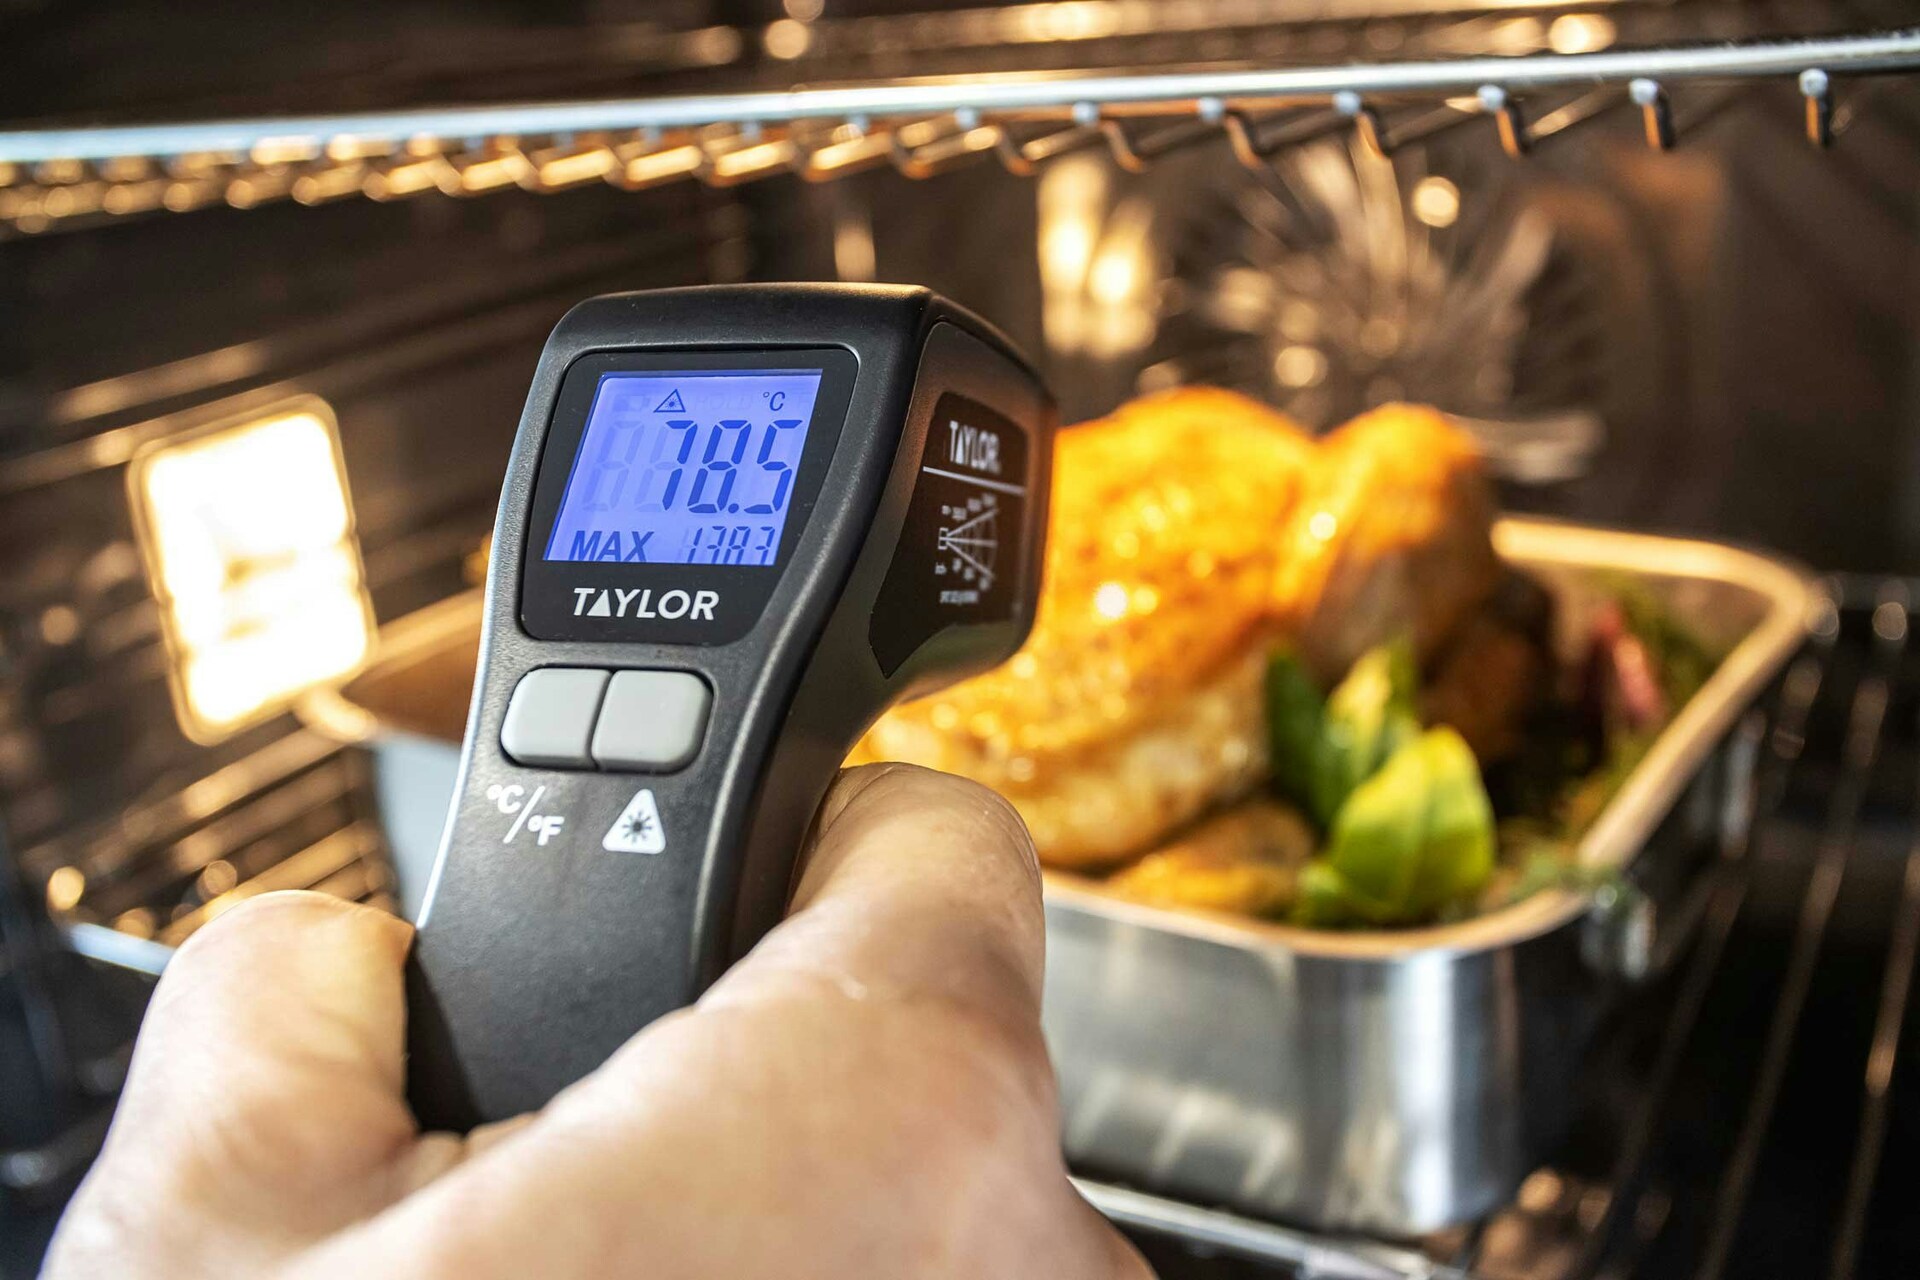 https://royaldesign.com/image/2/kitchen-craft-taylor-pro-infrared-thermometer-blister-packed-2